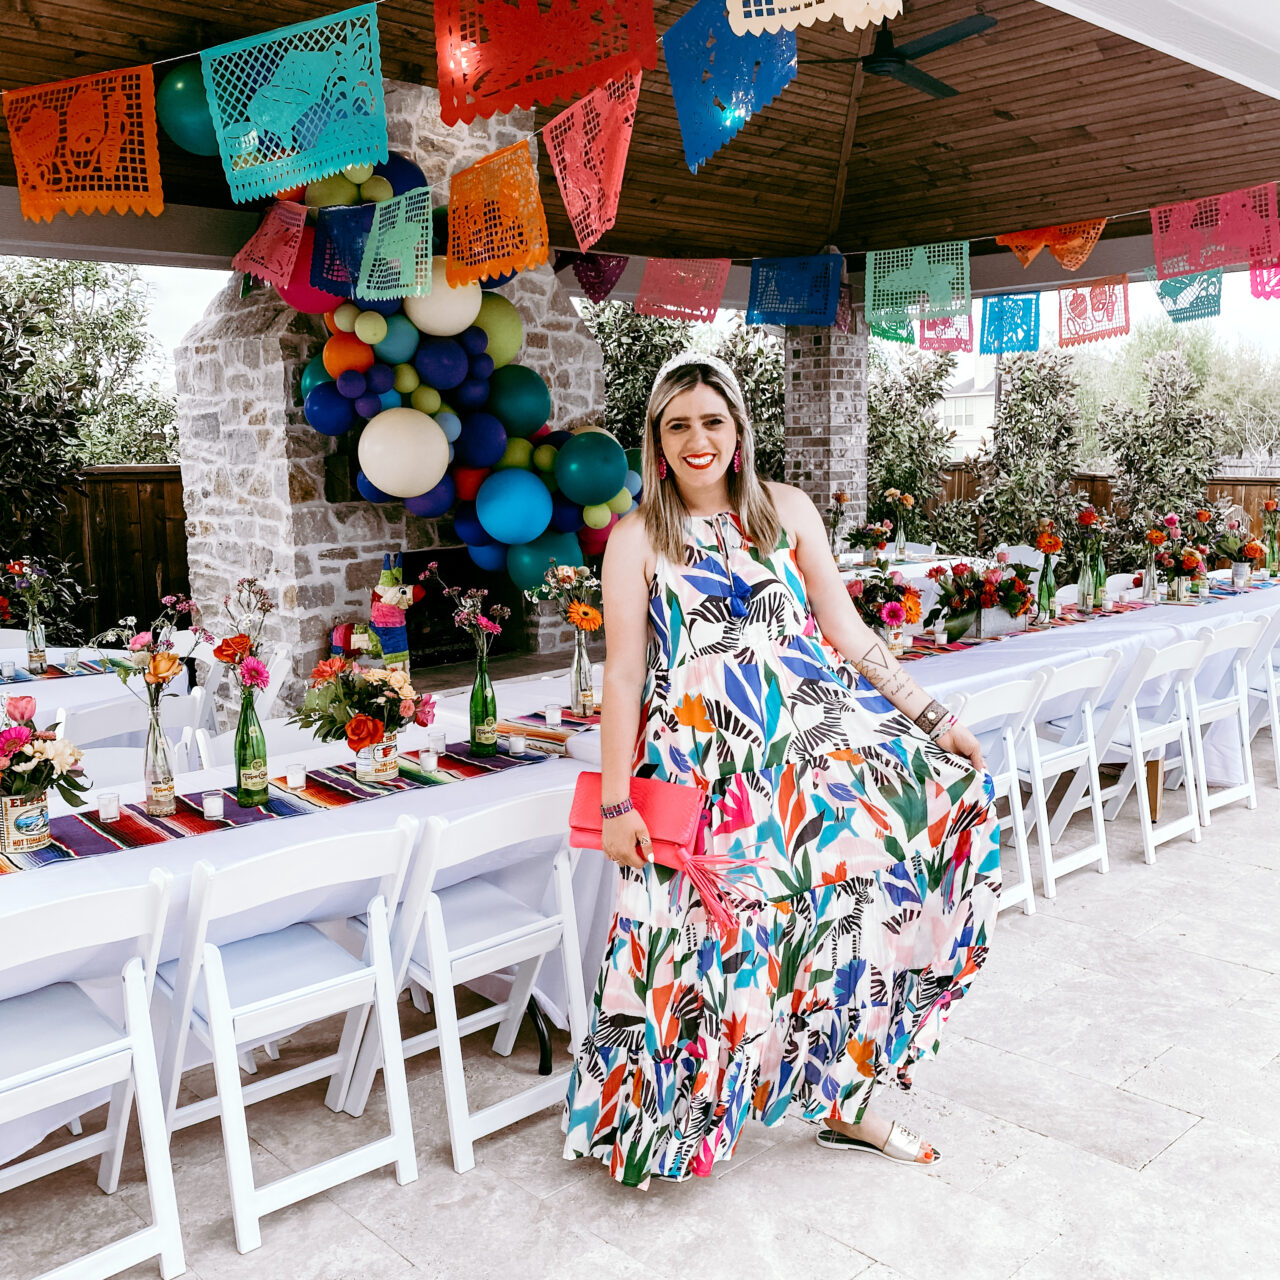 Sip sip ole! Hosting a Fiesta themed party